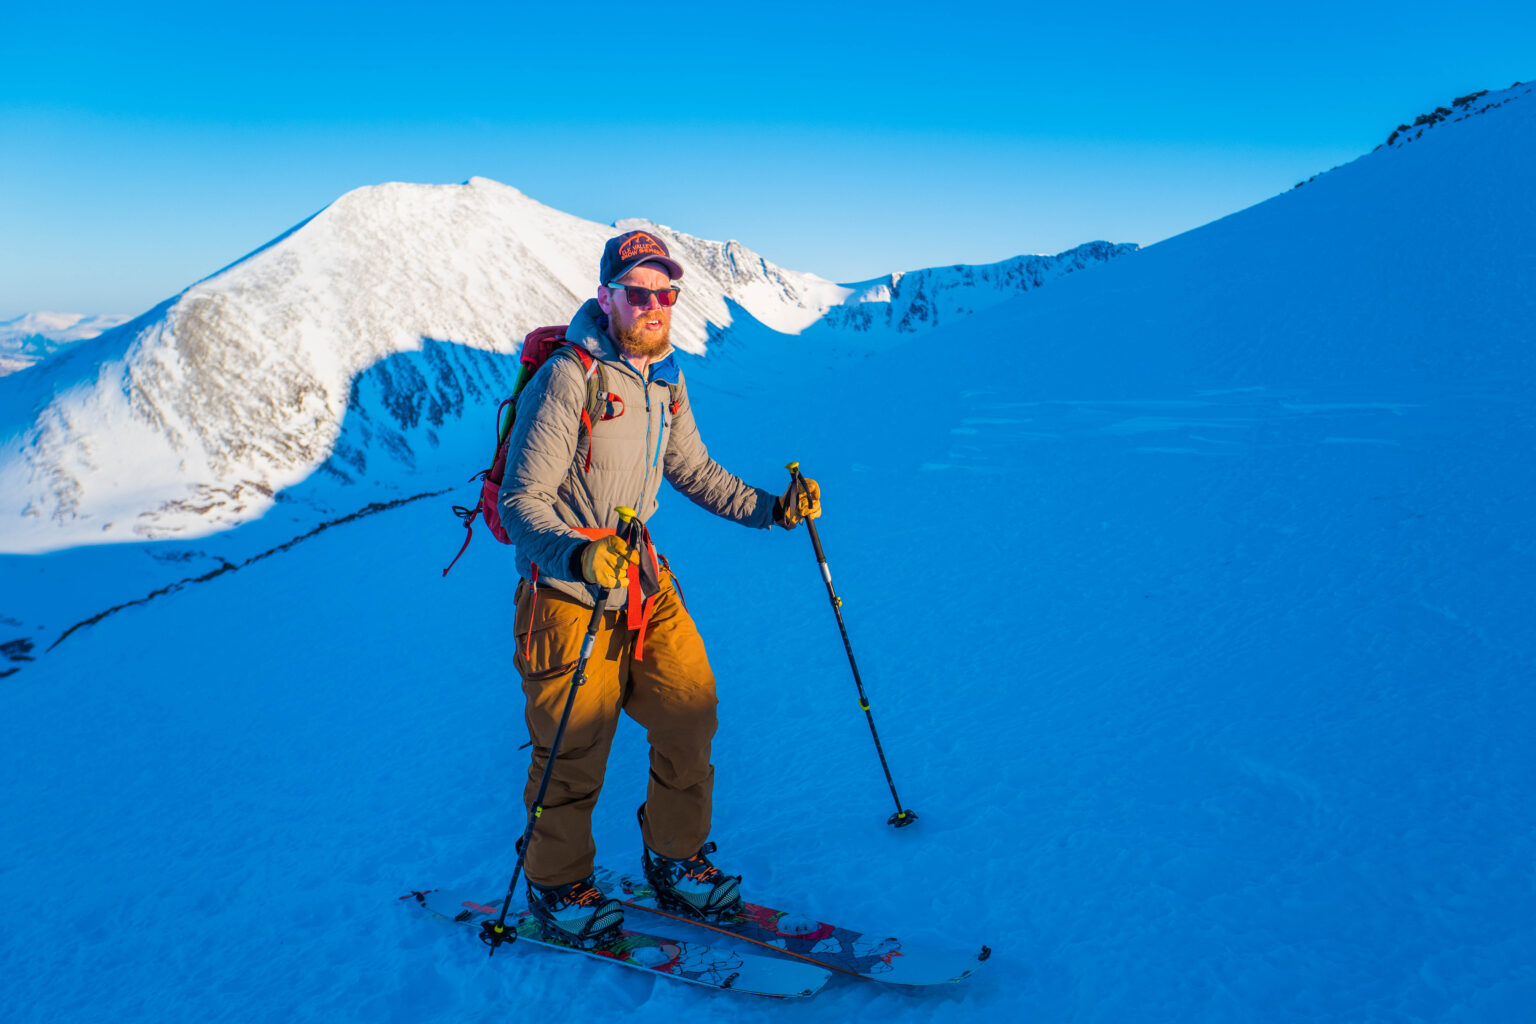 Ski touring up to the North Couloir of Rornestinden